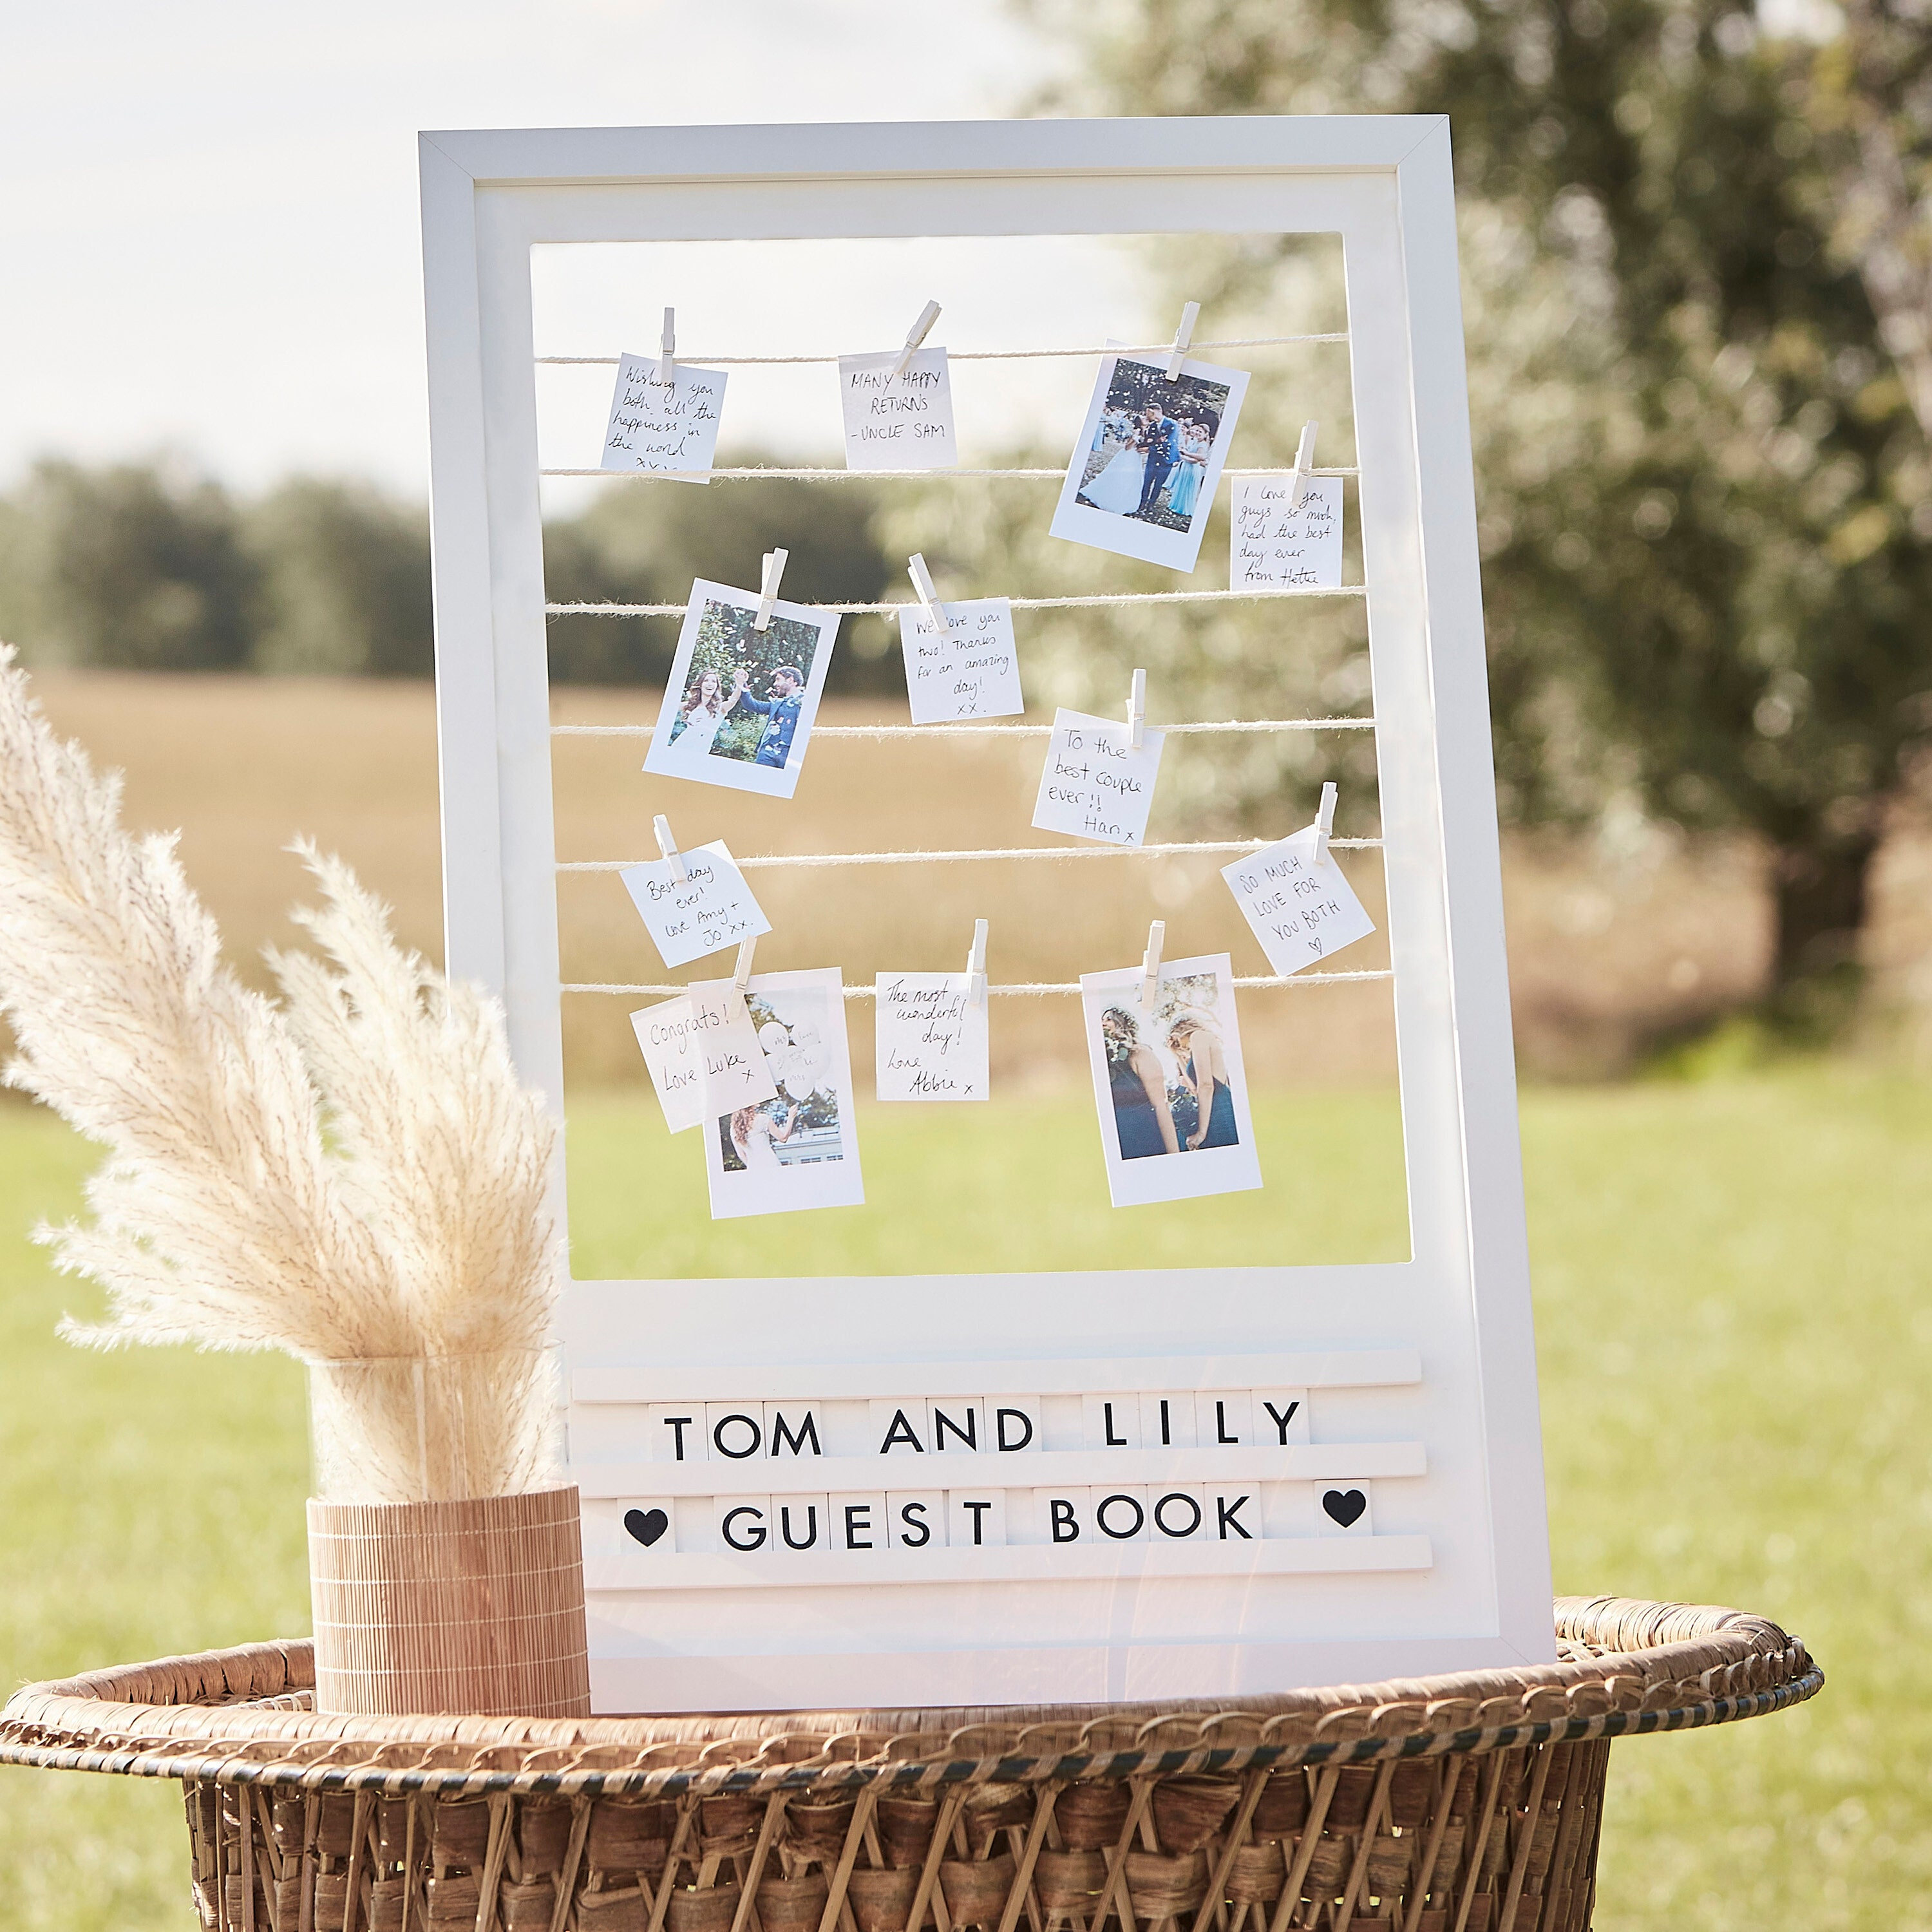 Yirtree Hanging Instant Photo Display Decorative Wall Hanging String with  Clips, Stick and Hang Photo Wall Decor, Wall Hanging Pictures Display for  Home, Dormitory and Cafe Decoration 